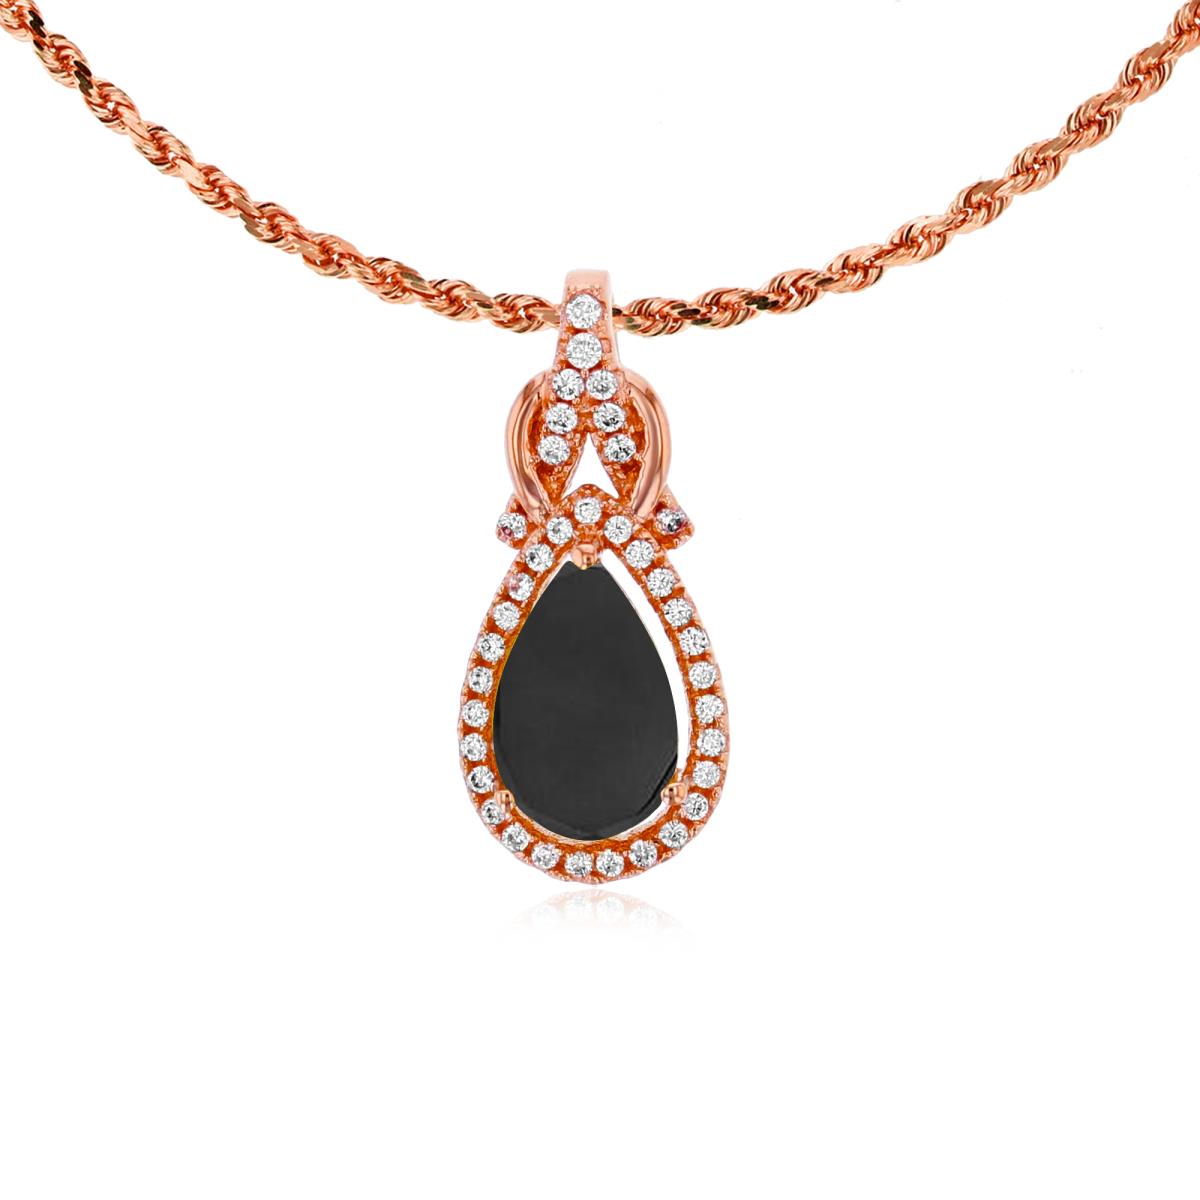 10K Rose Gold 8x5mm Pear Cut Onyx & 0.11 CTTW Rnd Diamond Knot 18" Rope Chain Necklace